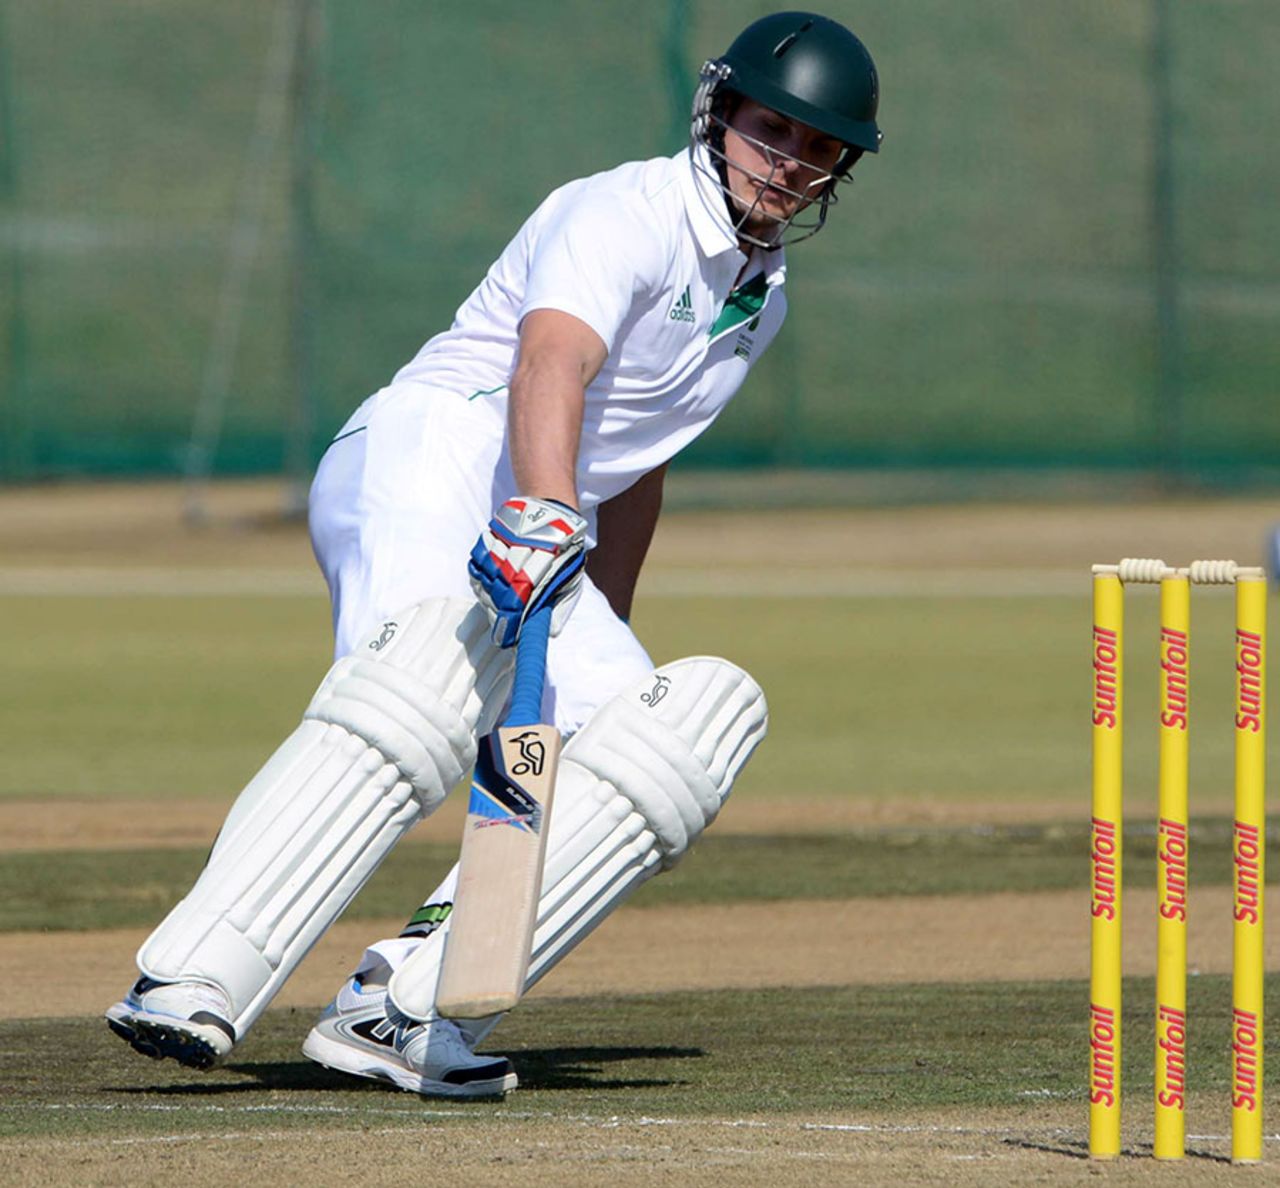 Stiaan van Zyl completes a run, South Africa A v Australia A, 1st unofficial Test, Pretoria, 2nd day, July 25, 2013